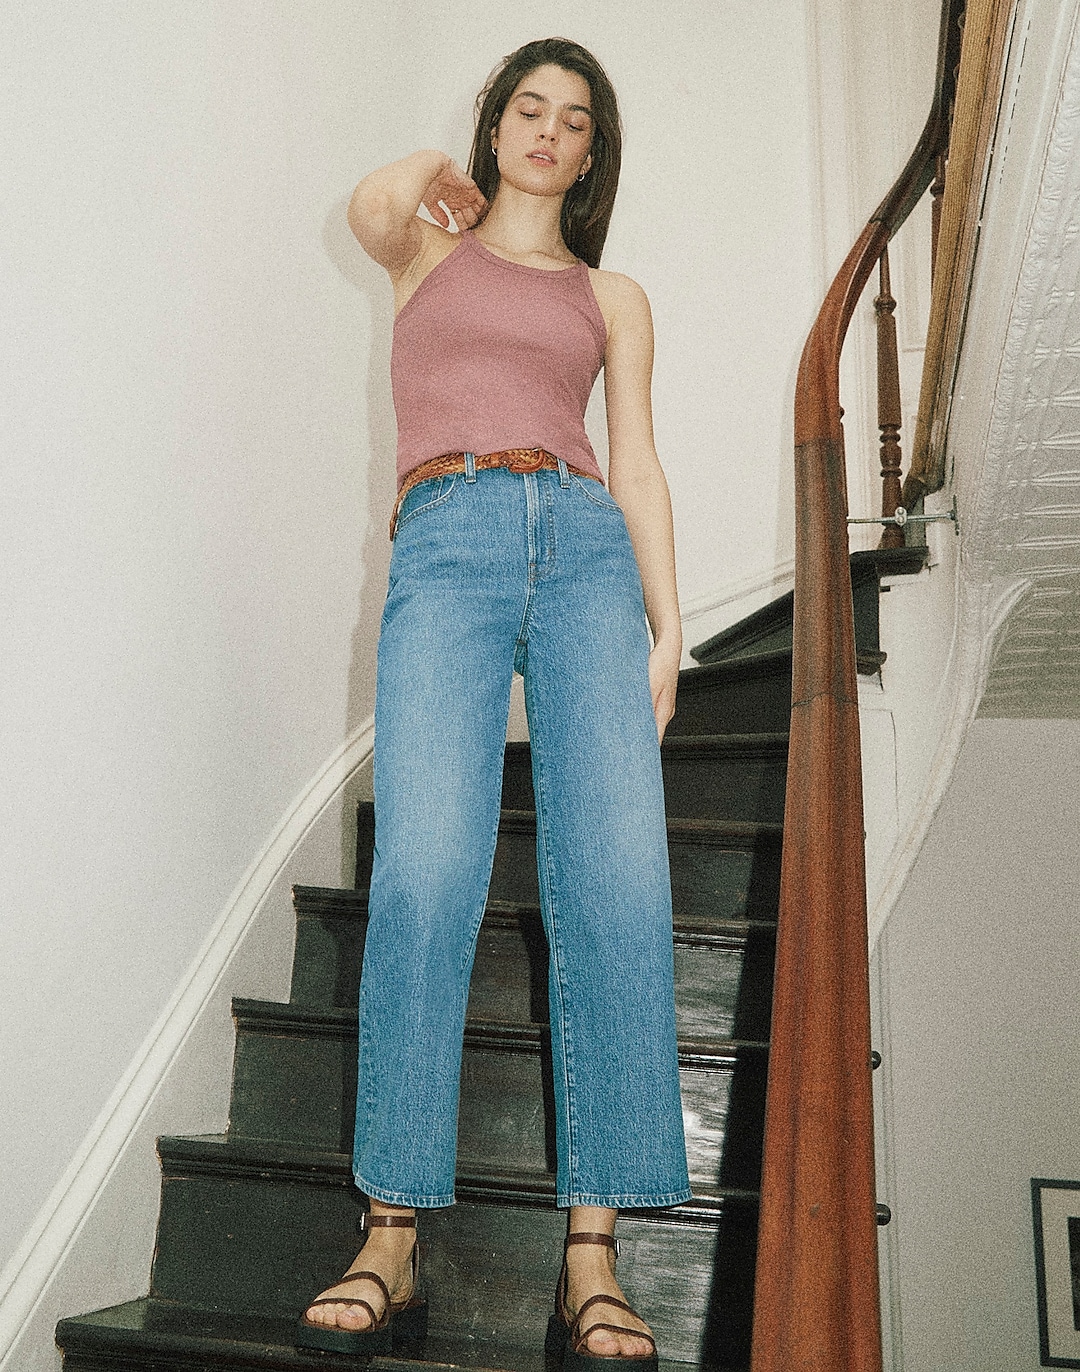 The Petite Perfect Vintage Wide-Leg Crop Jean in Cresslow Wash | Madewell